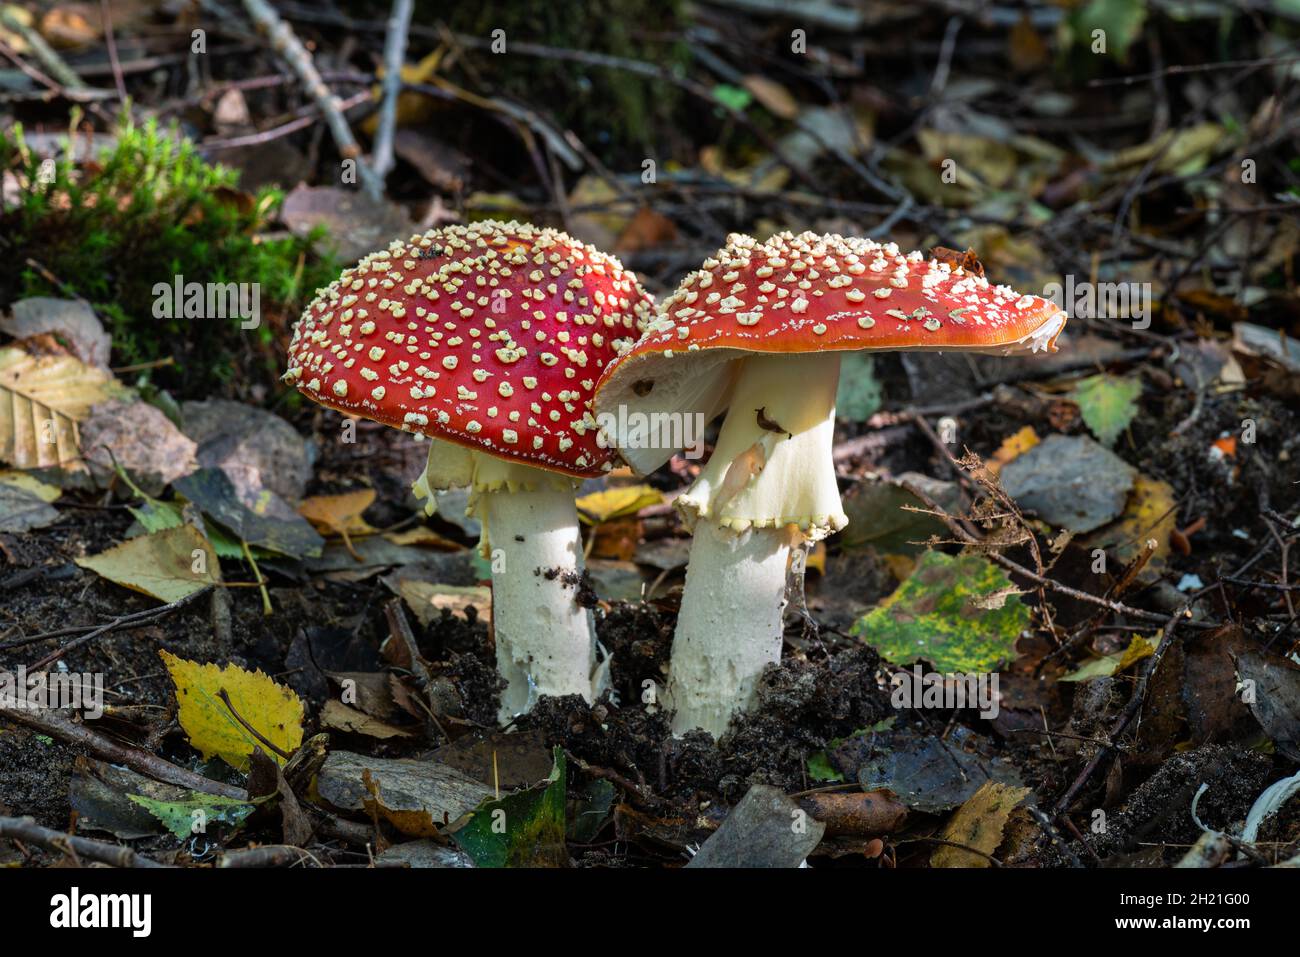 Close-up view of two mushrooms Amanita muscaria, commonly known as fly agaric or fly amanita, with typical bright red cap dotted with white spots. Stock Photo